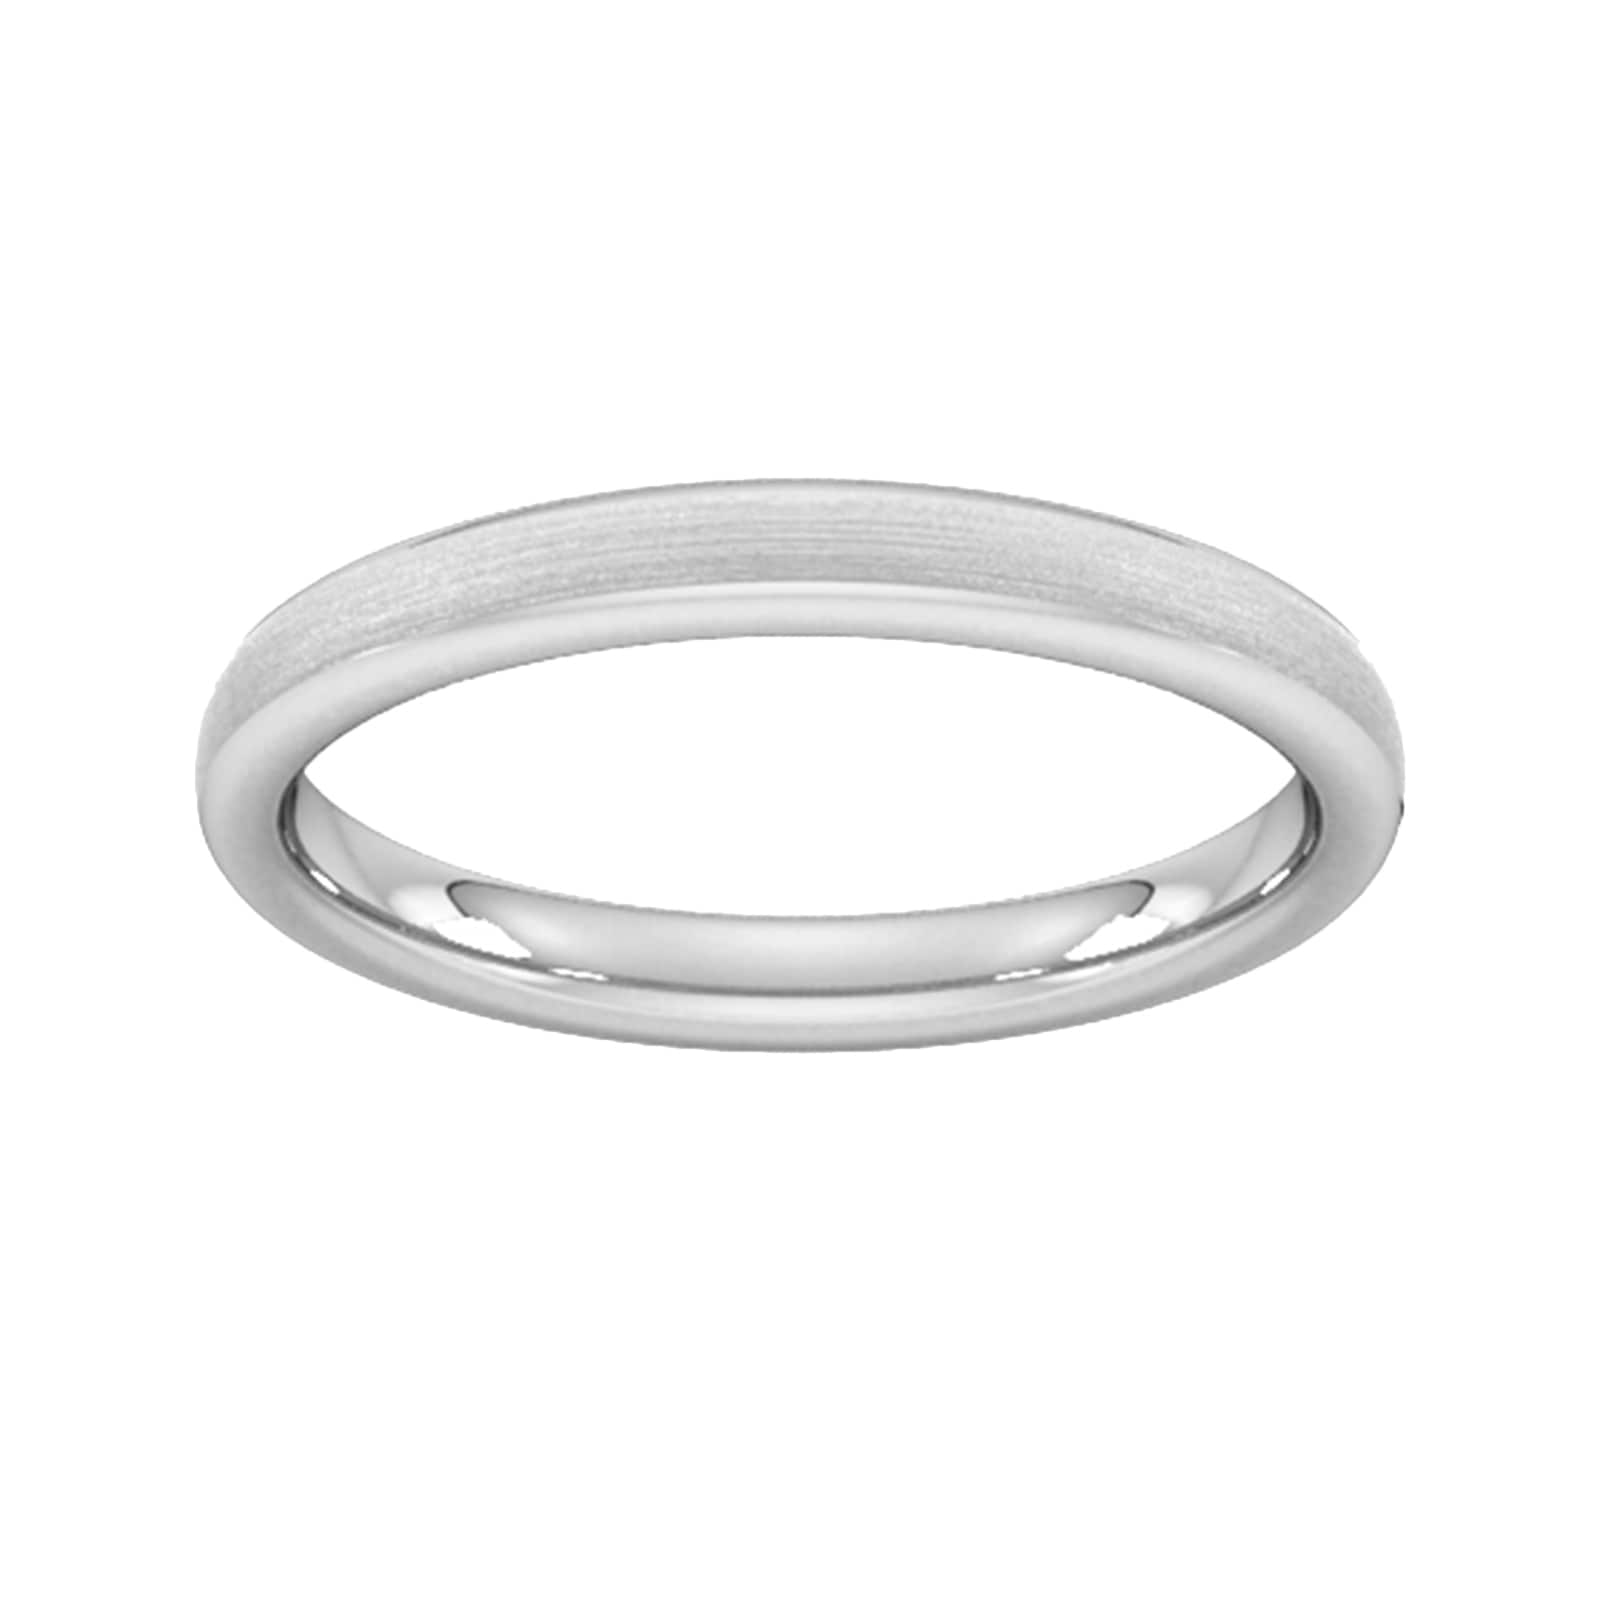 Real Gold-Plated Infinity Band Ring for Women | Old Navy